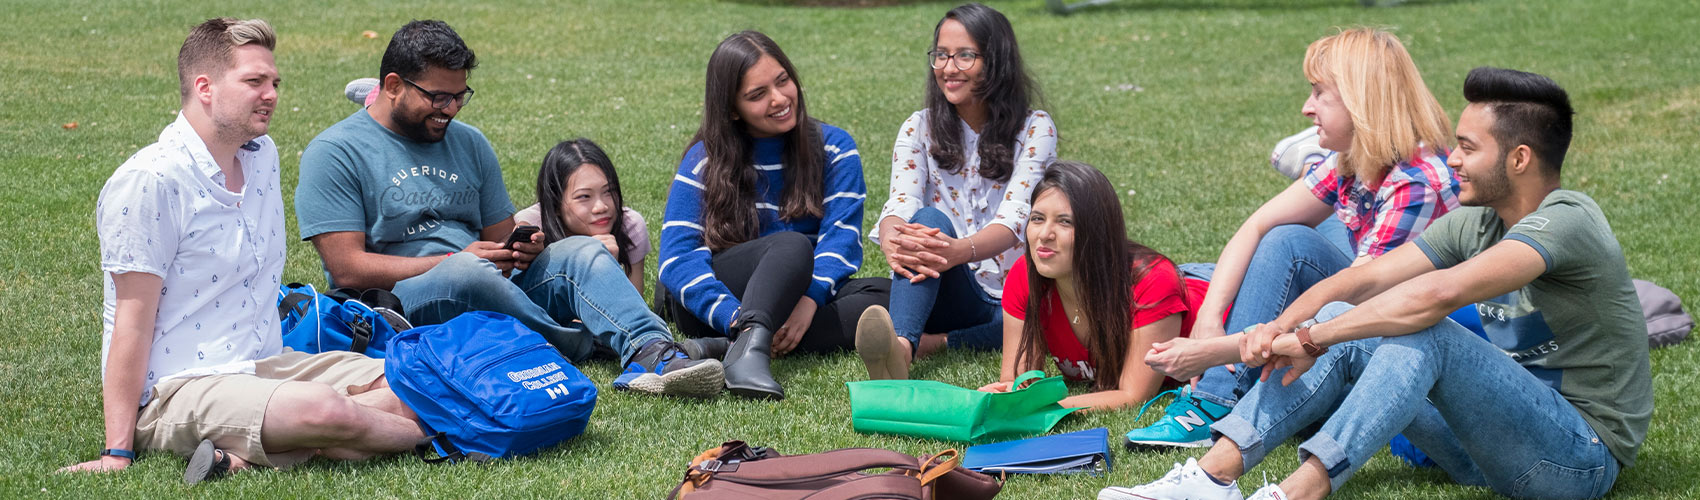 A group of eight international students sitting on green grass with backpacks and binders around them